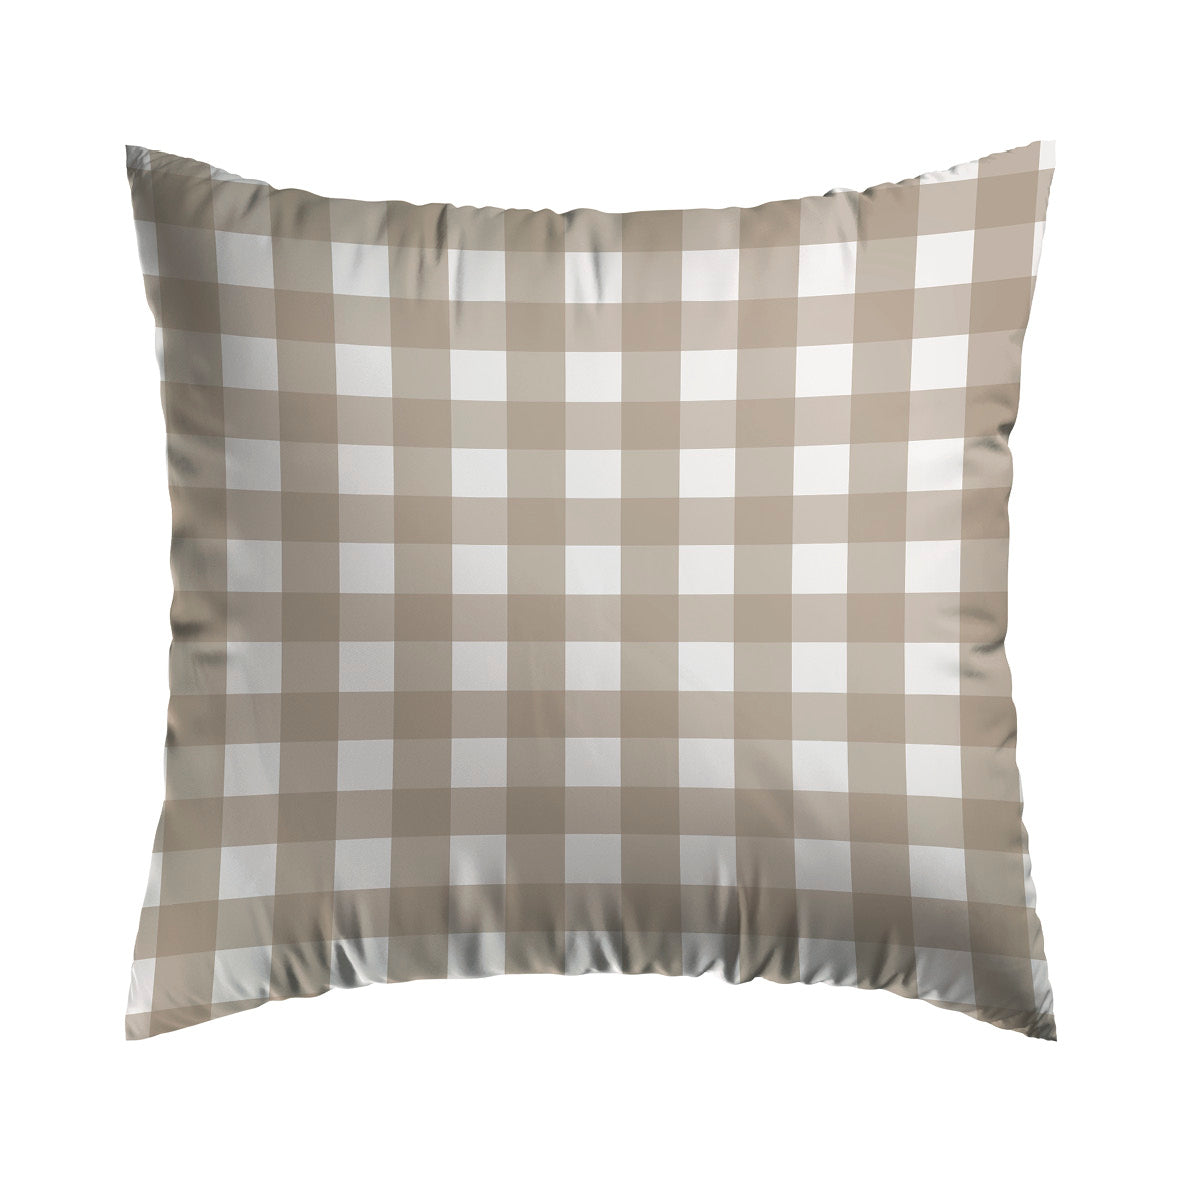 Set of 2 pillowcases cotton - Vichy Taupe 2 x (63 x 63 cm)